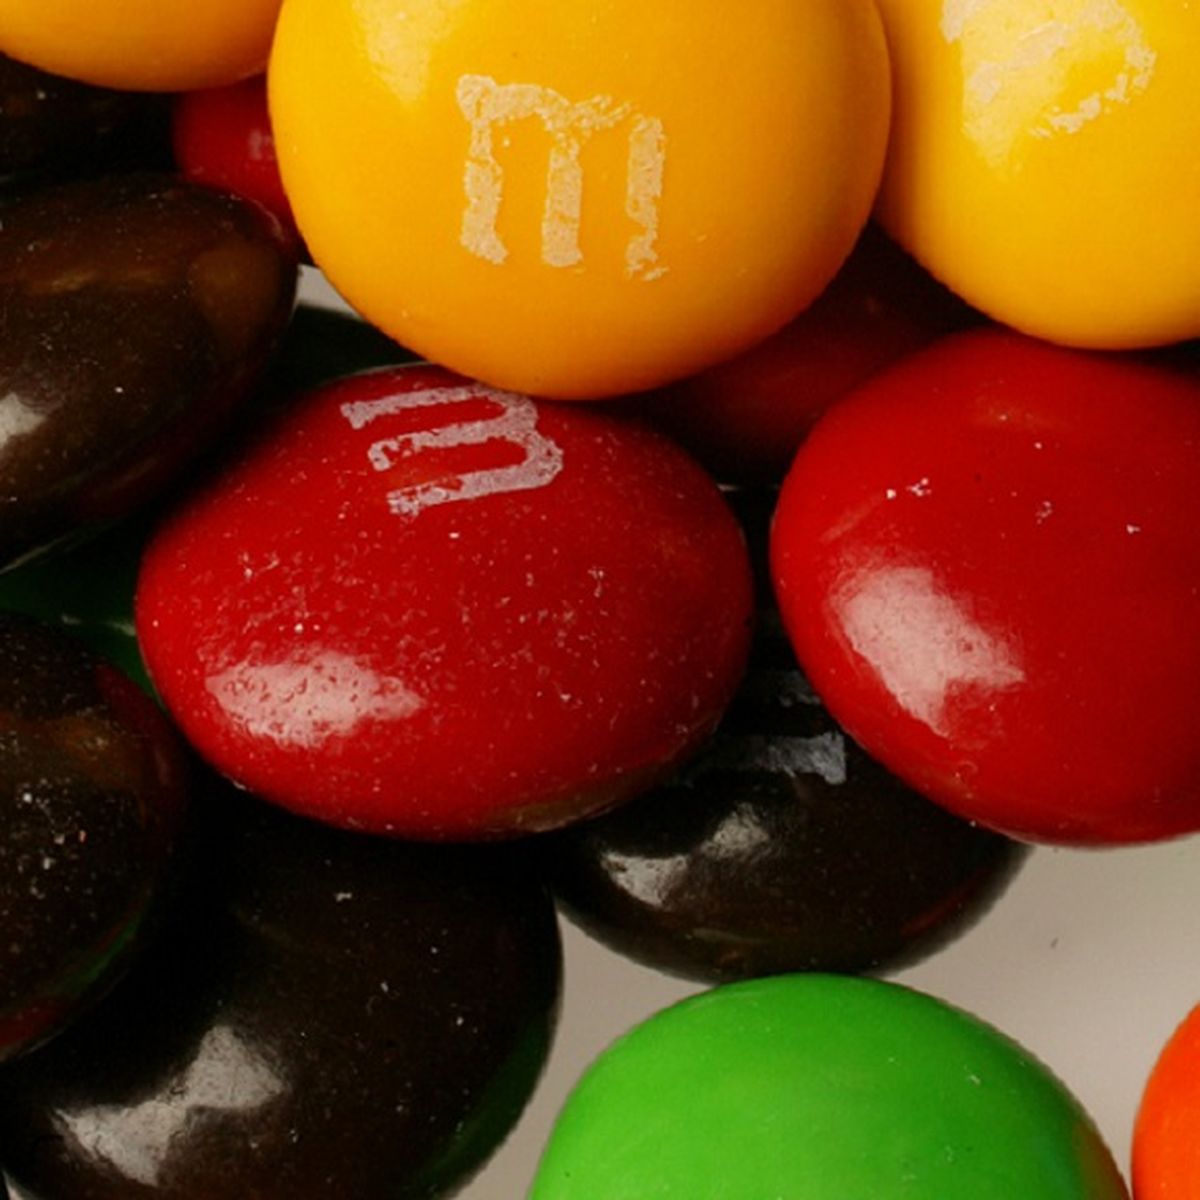 What does M&M stand for? Meaning behind M&M's chocolate